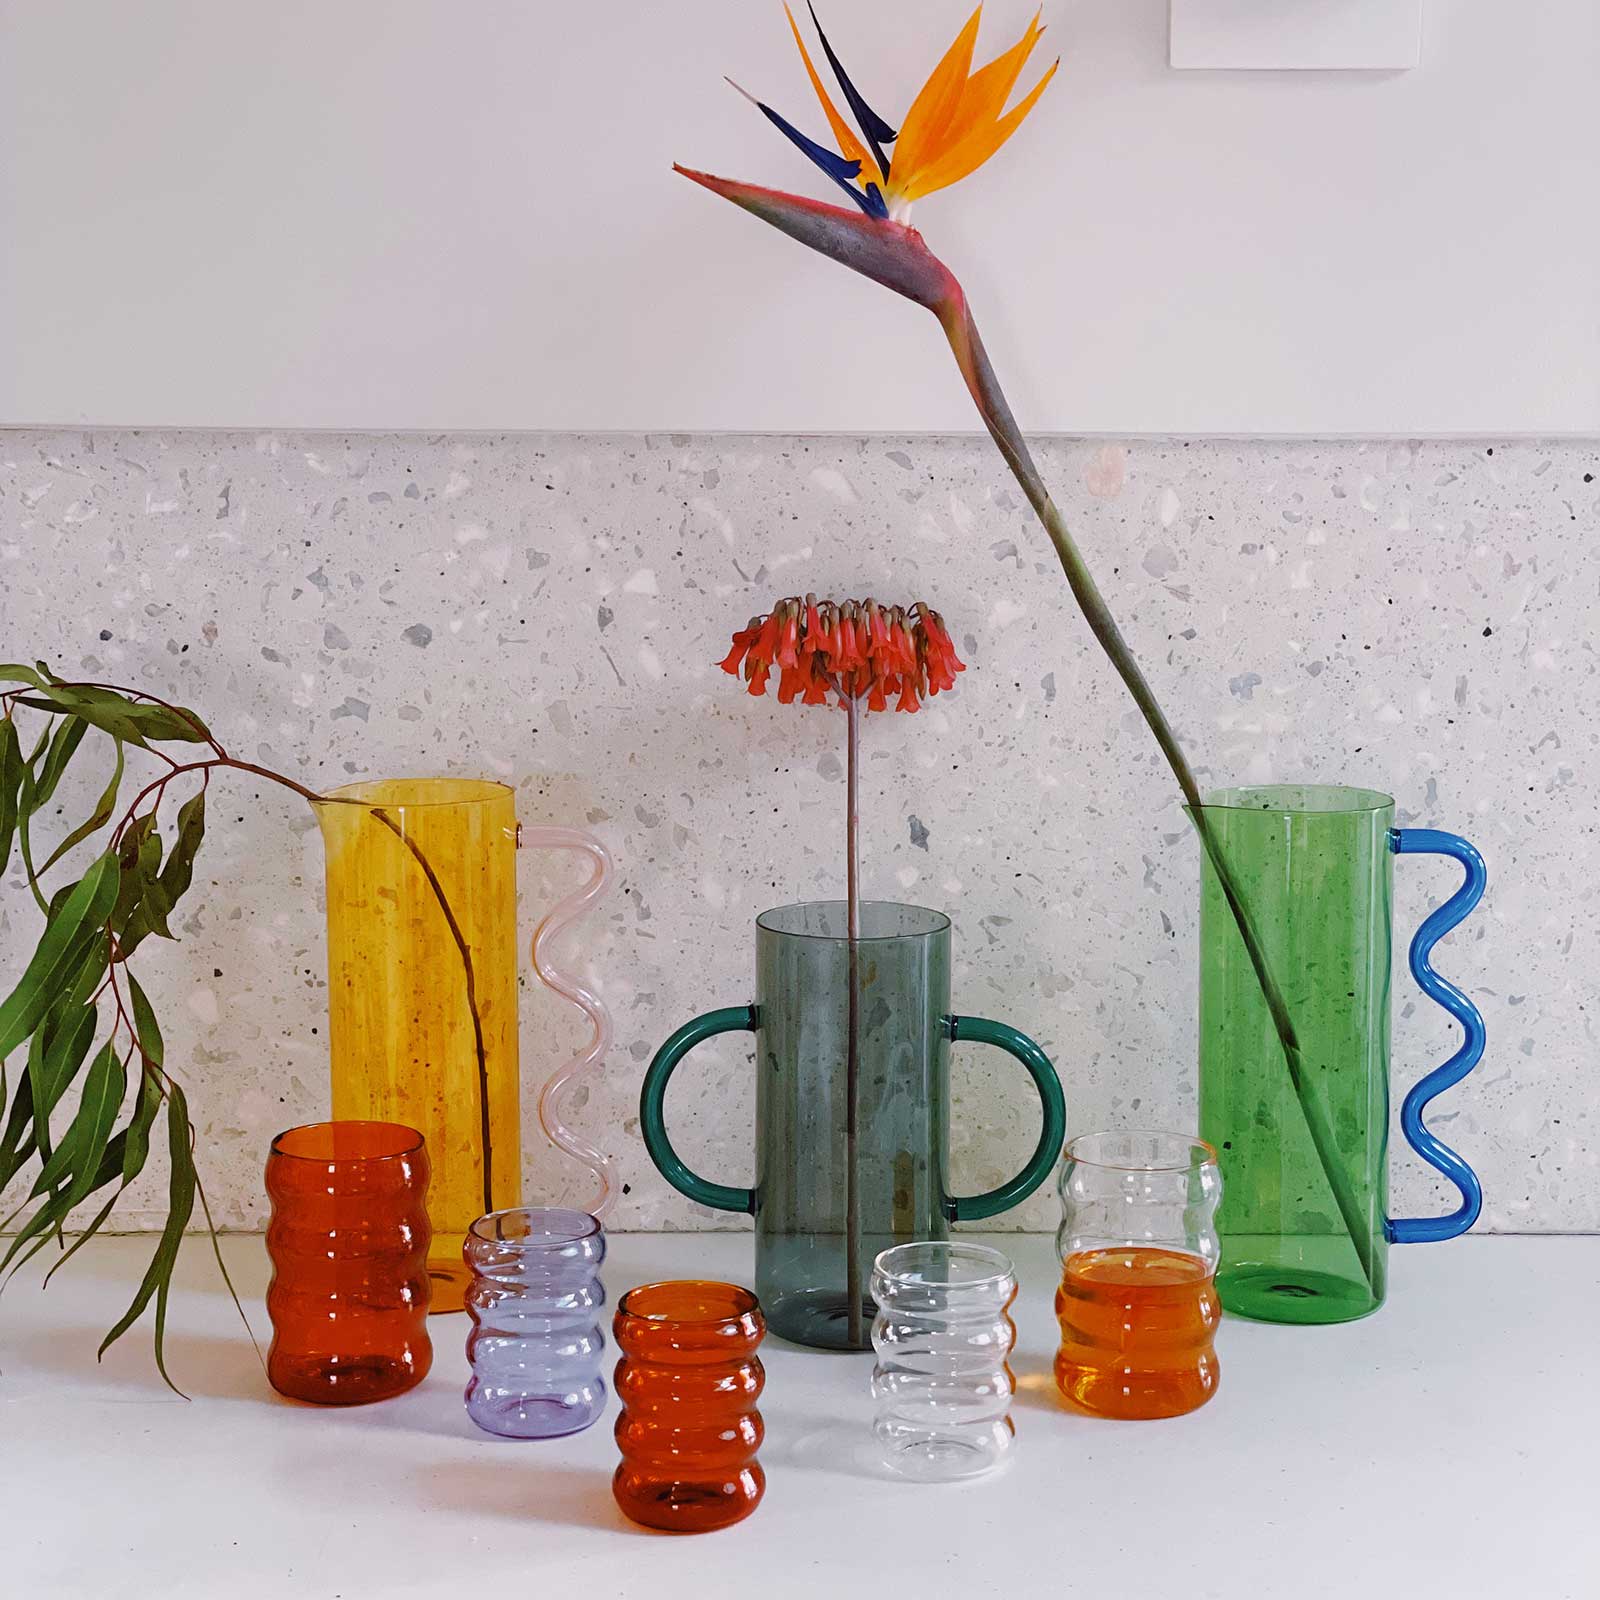 Photograph of various colorful glassware and vases designed by Sophie Lou Jacobsen.